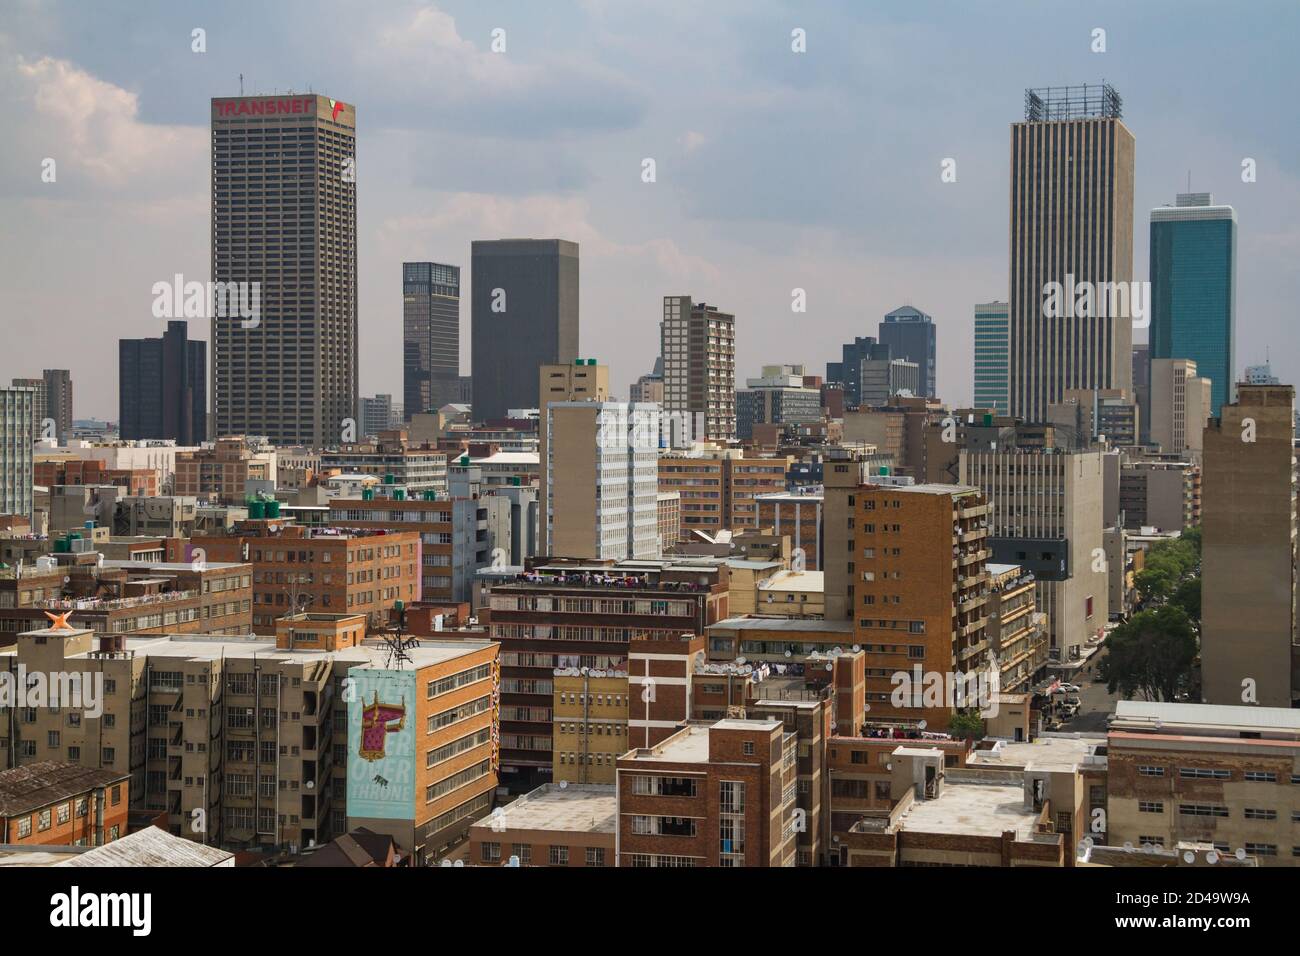 Johannesburg, Gauteng, South Africa Sept 19, 2020: aerial view of the downtown cbd with residential and commerical buildings. Stock Photo